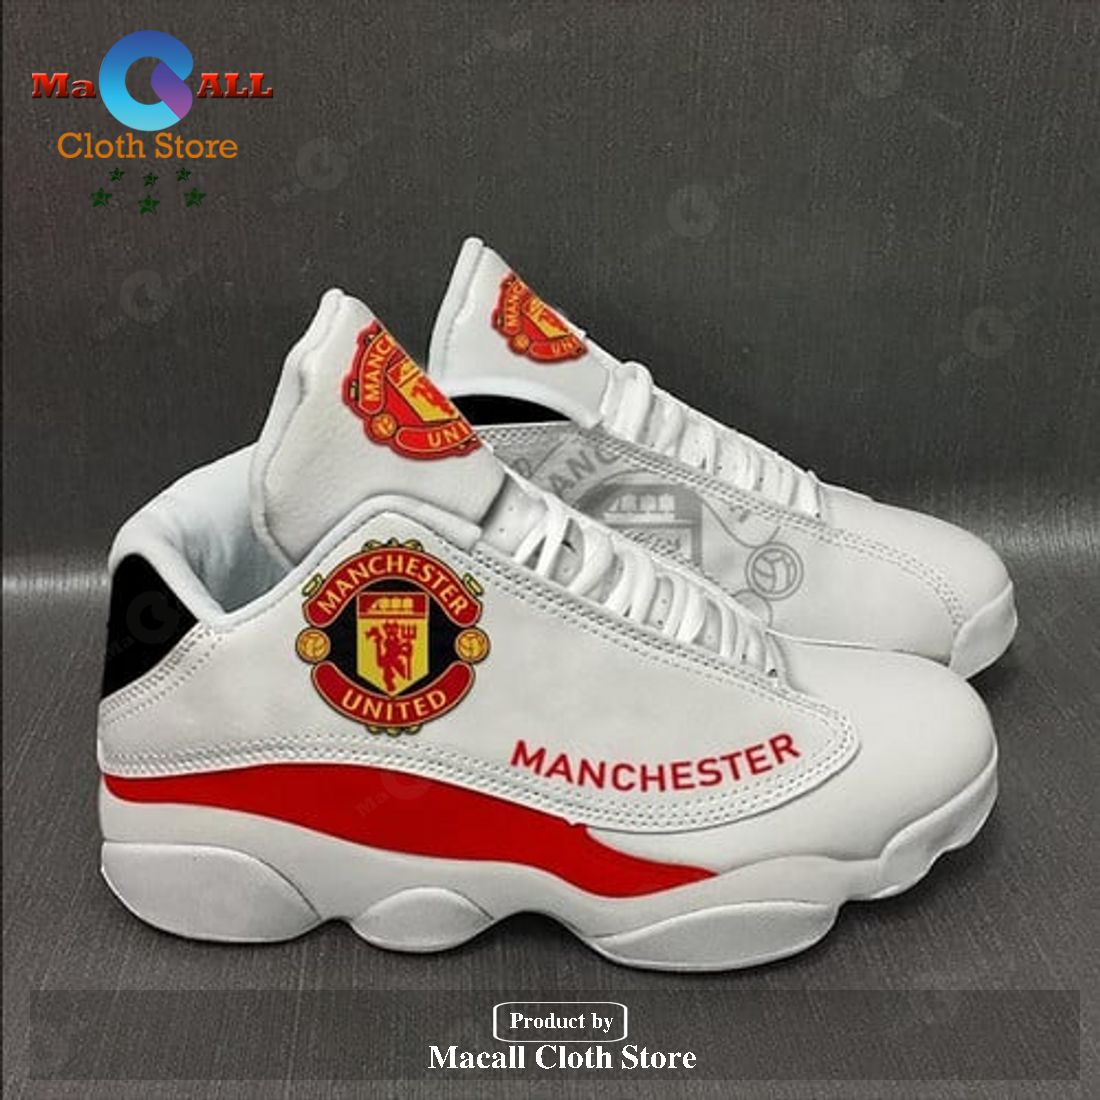 Manchester United football team form AIR Jordan 13 Sneakers Gift Shoes For  Fan POD Design - Macall Cloth Store - Destination for fashionistas